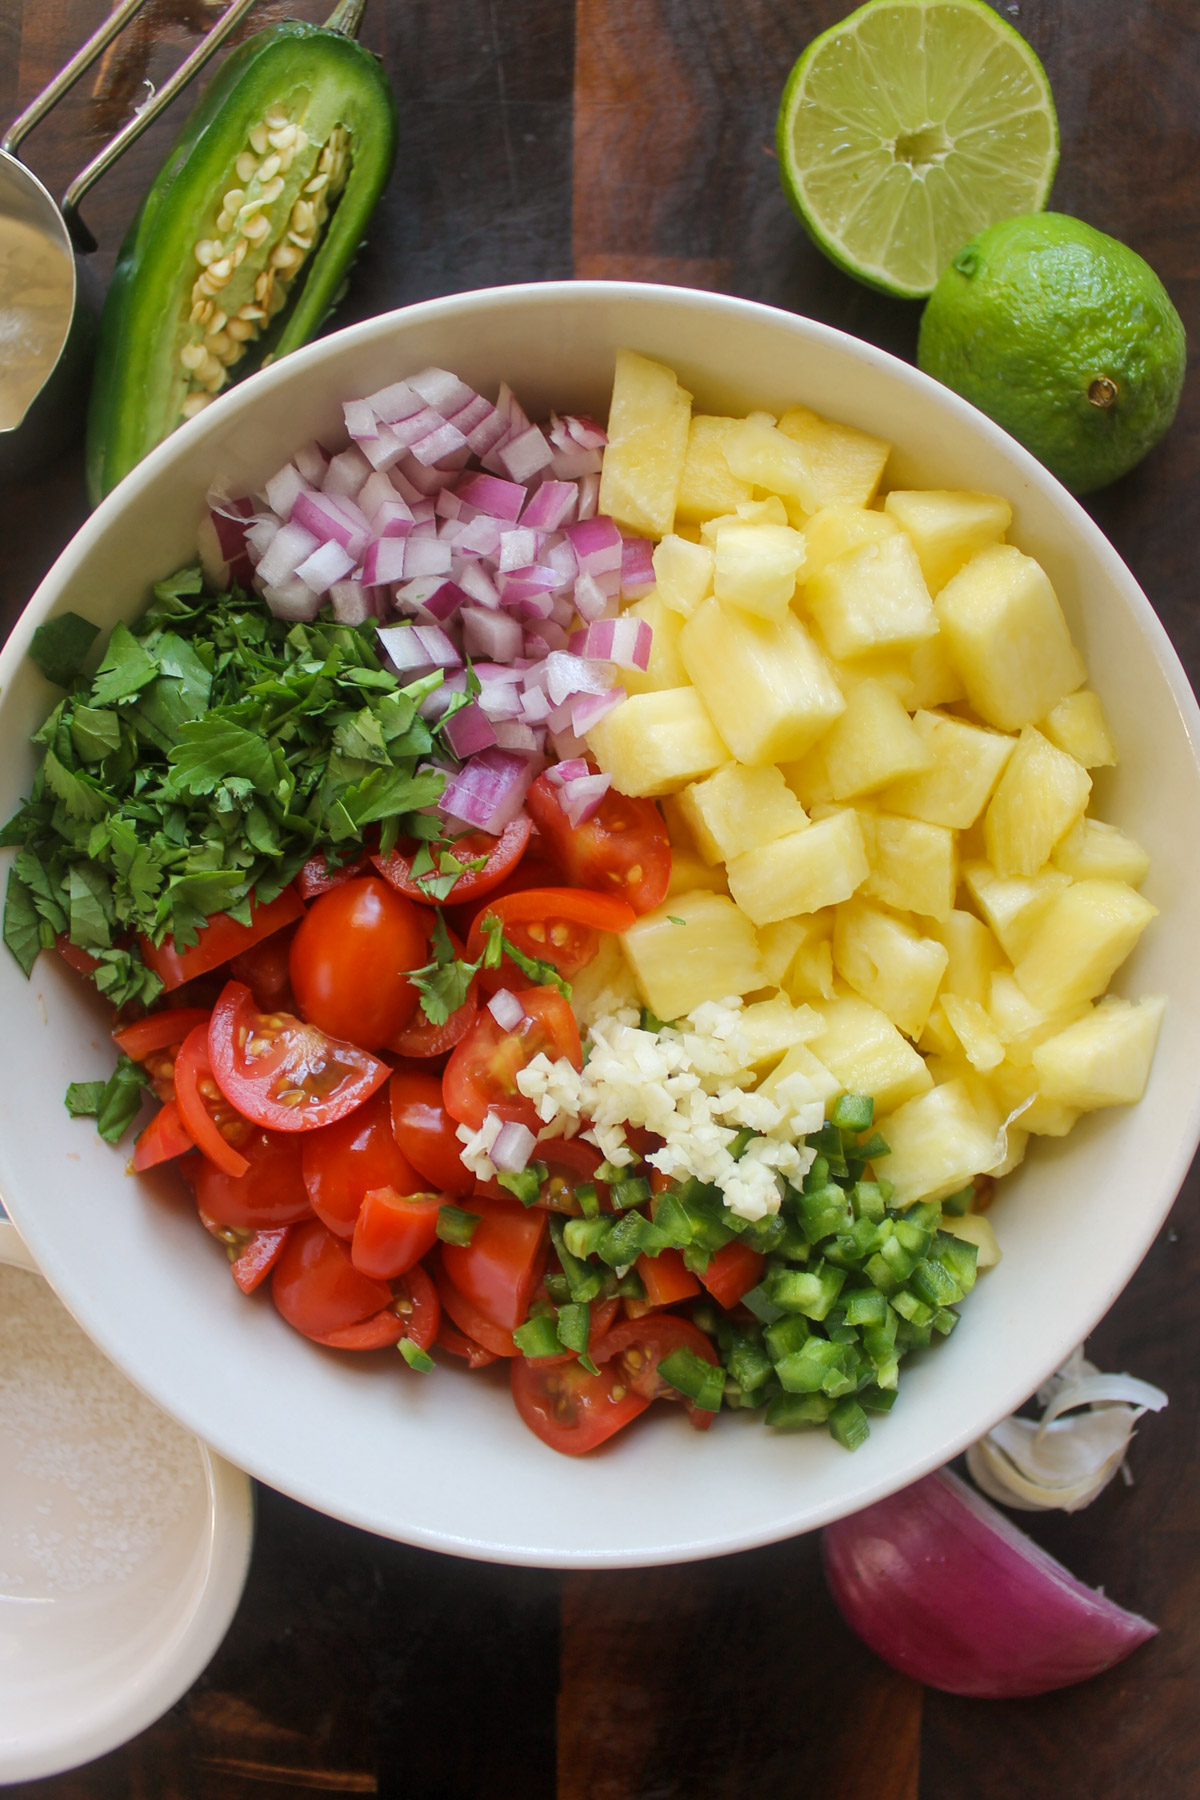 Ingredients for pineapple pico de gallo chopped and in a bowl.